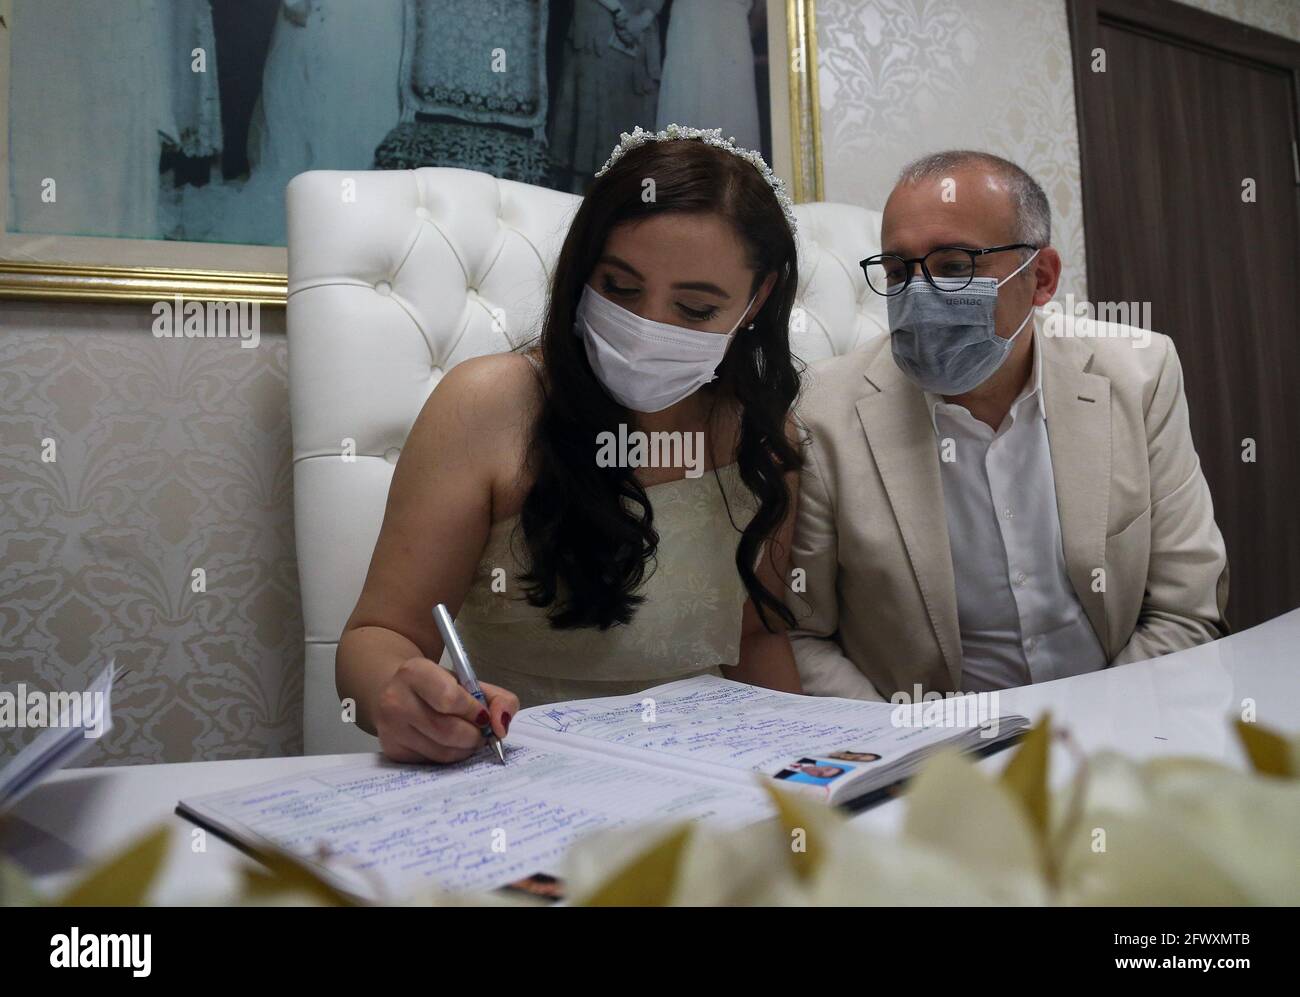 Ankara, Turkey. 24th May, 2021. A couple wearing face masks perform marriage registration during their simple wedding ceremony amid the COVID-19 pandemic in Ankara, Turkey, on May 24, 2021. Credit: Mustafa Kaya/Xinhua/Alamy Live News Stock Photo